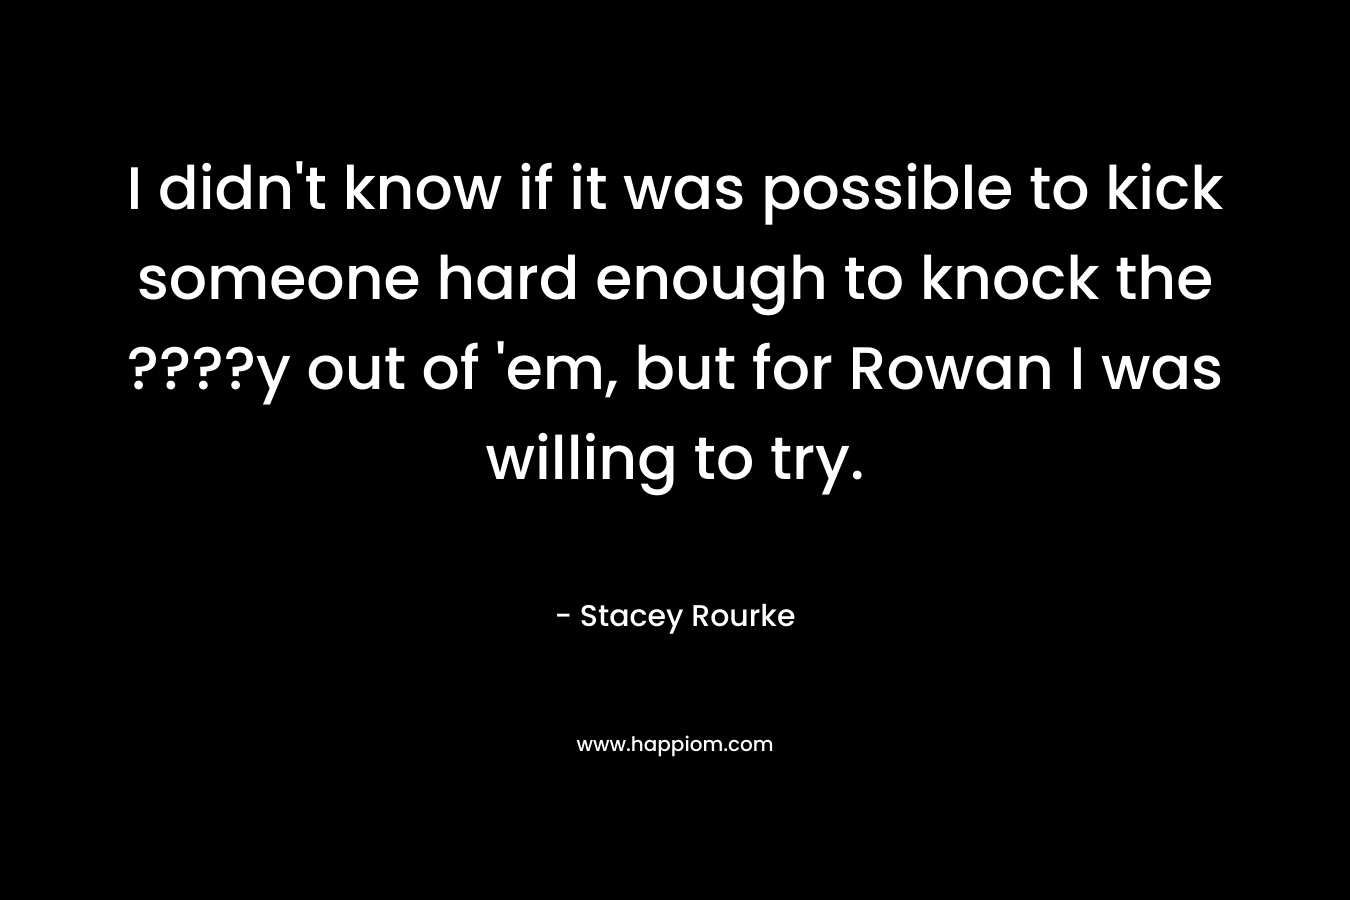 I didn’t know if it was possible to kick someone hard enough to knock the ????y out of ’em, but for Rowan I was willing to try. – Stacey Rourke